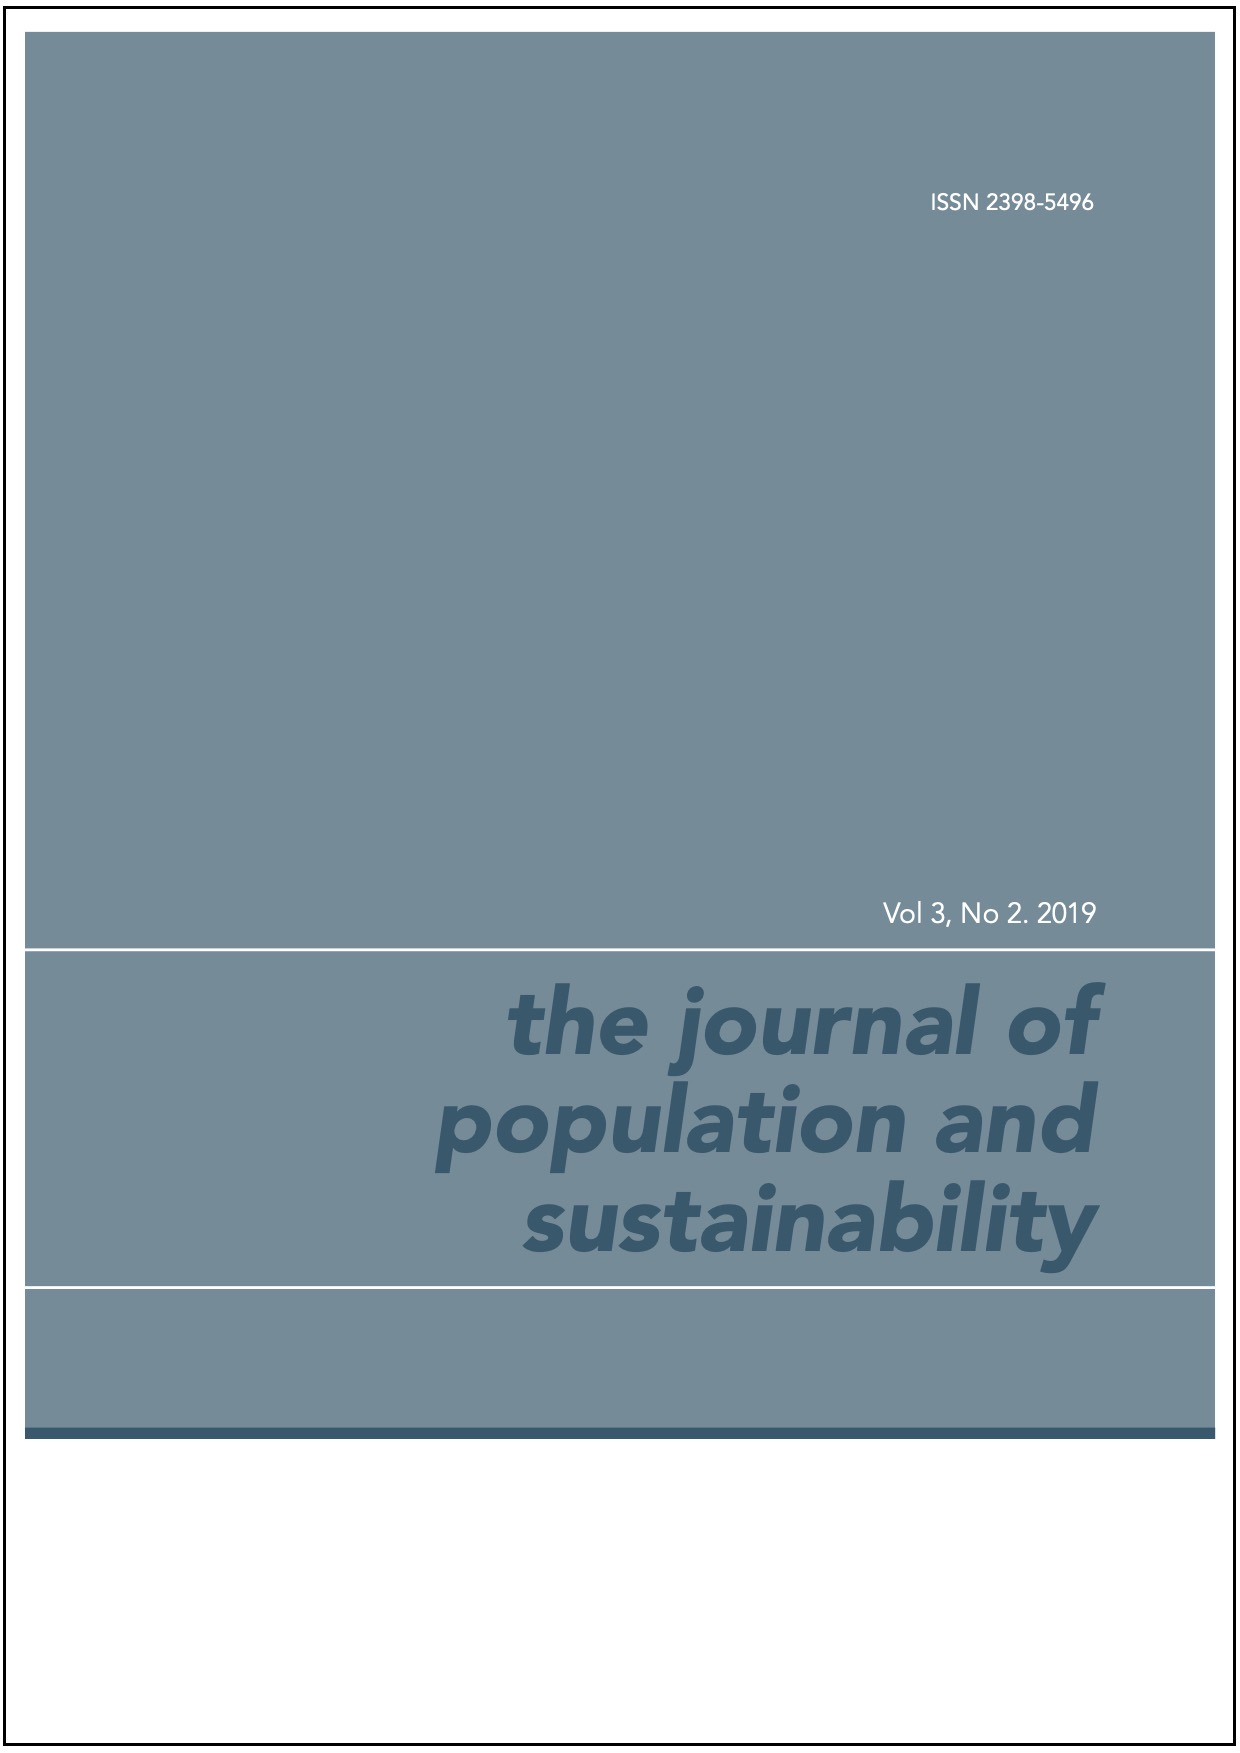 This image of the cover of this issue of The Journal of Population and Sustainability has the title in block letters on a grey-green background.